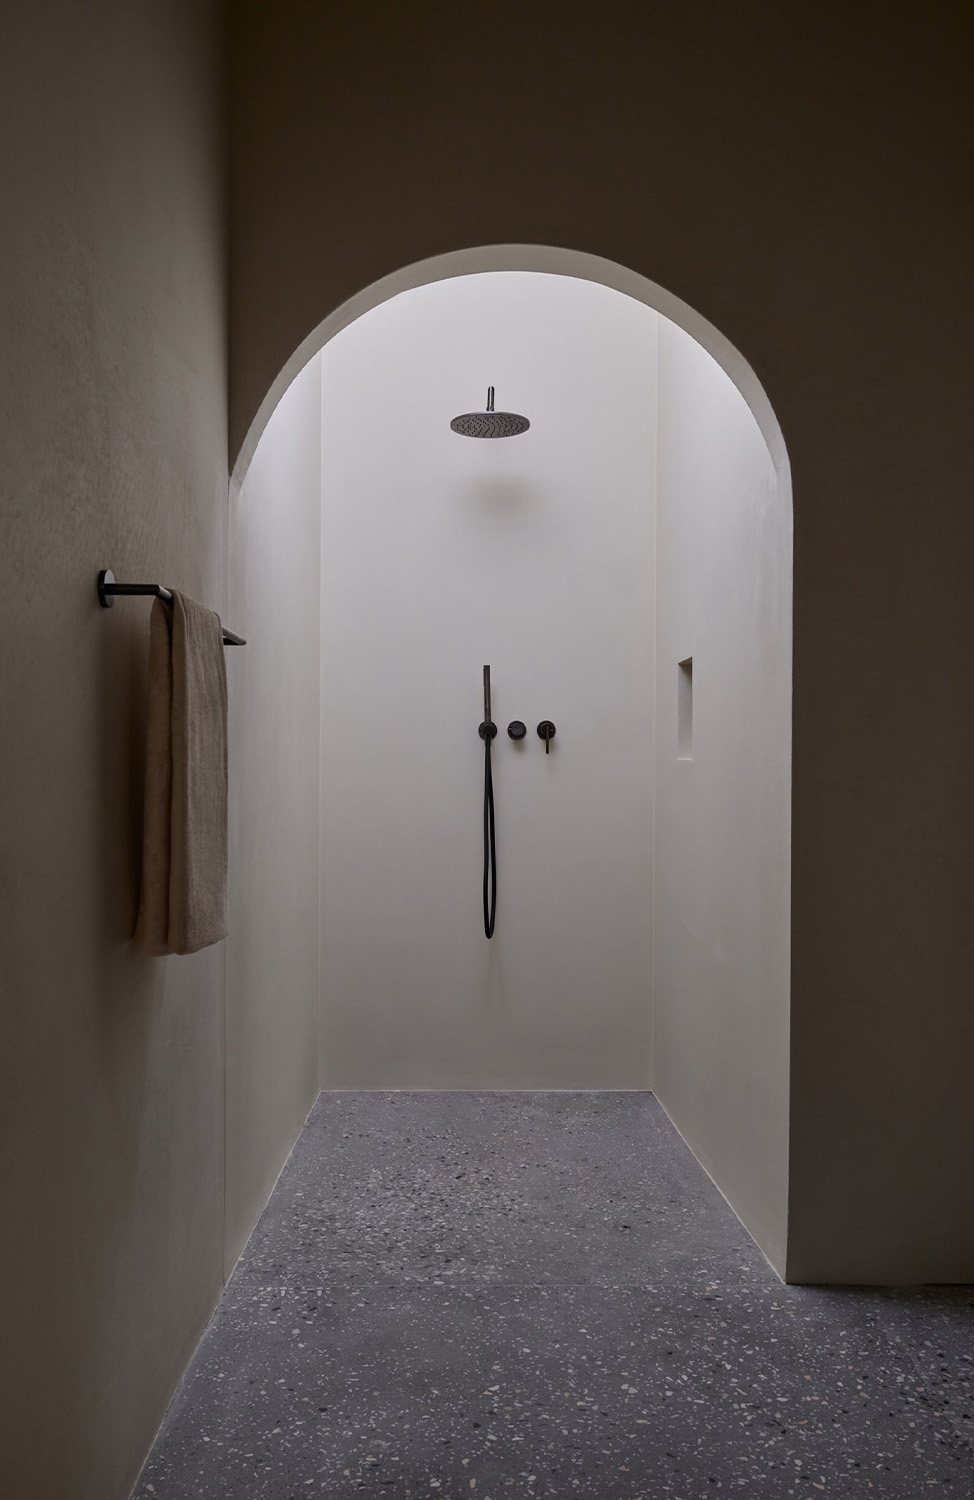 Shower with black fittings and plastered walls